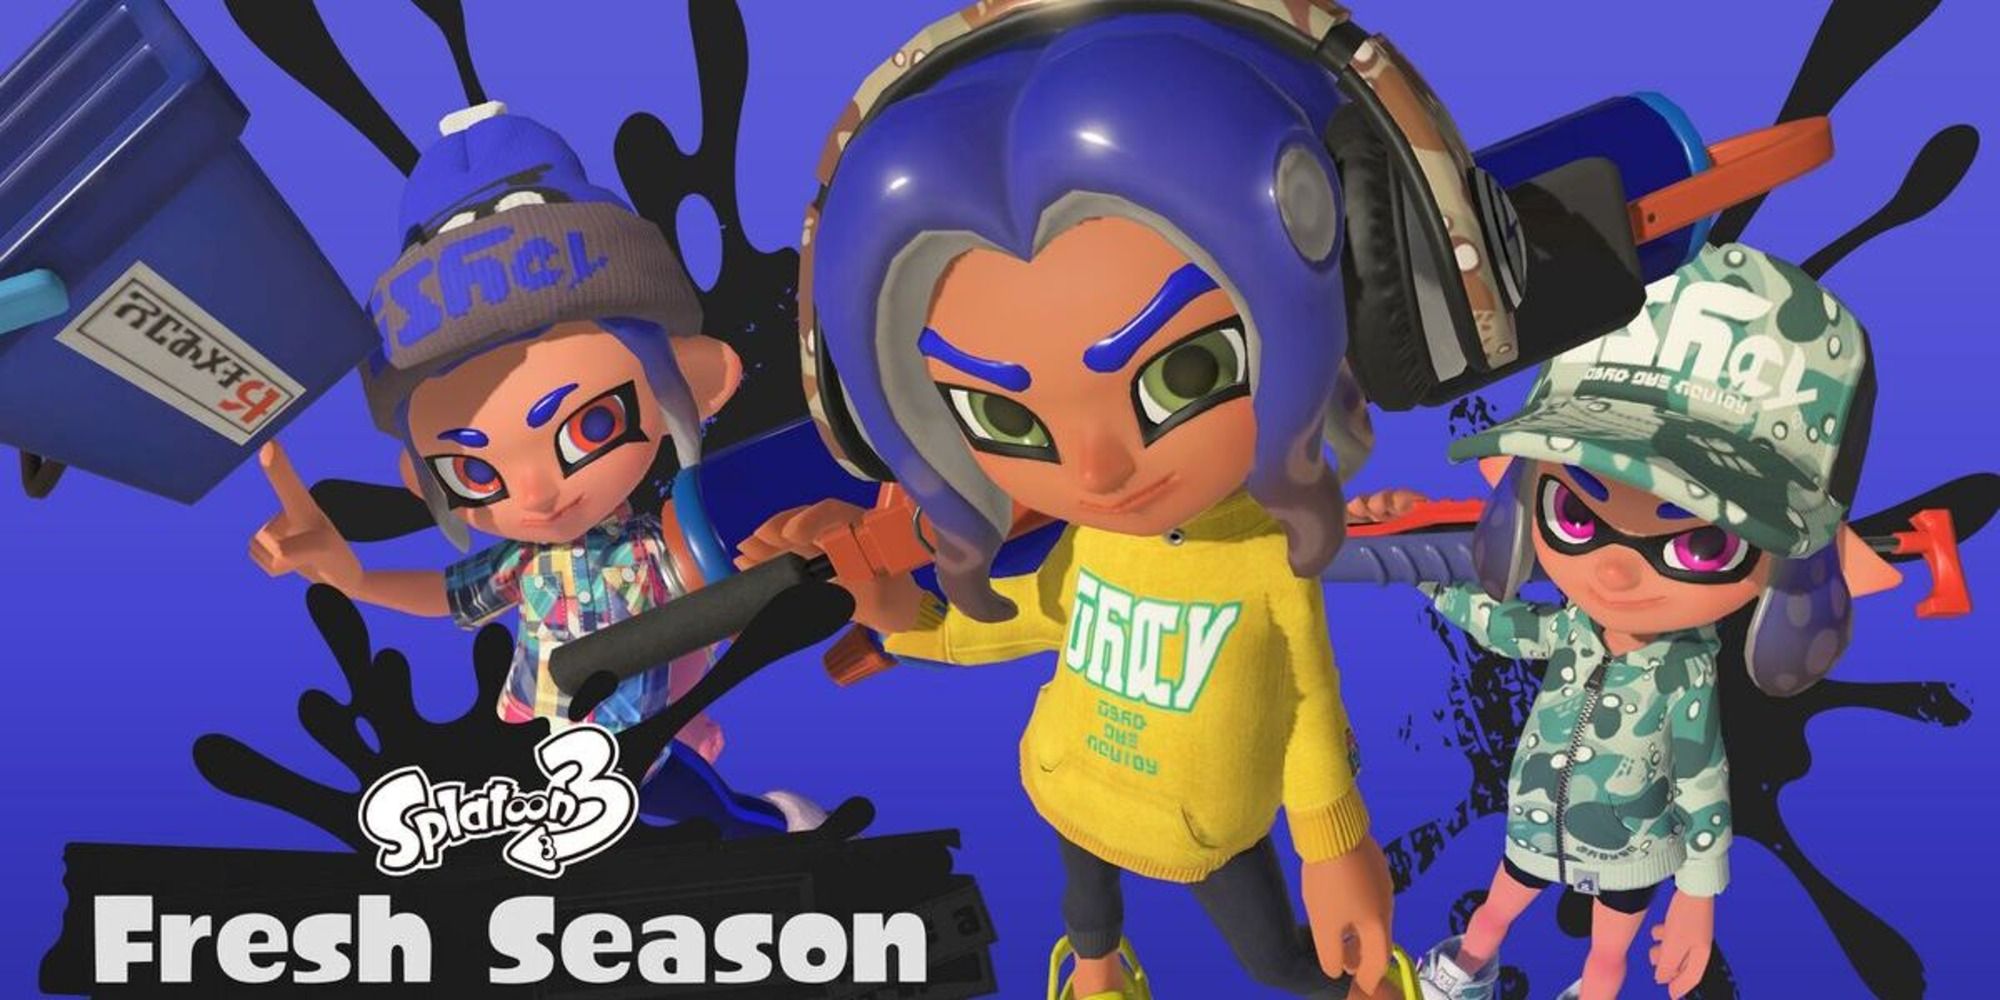 A promotional image for Splatoon 3's upcoming Fresh Season.